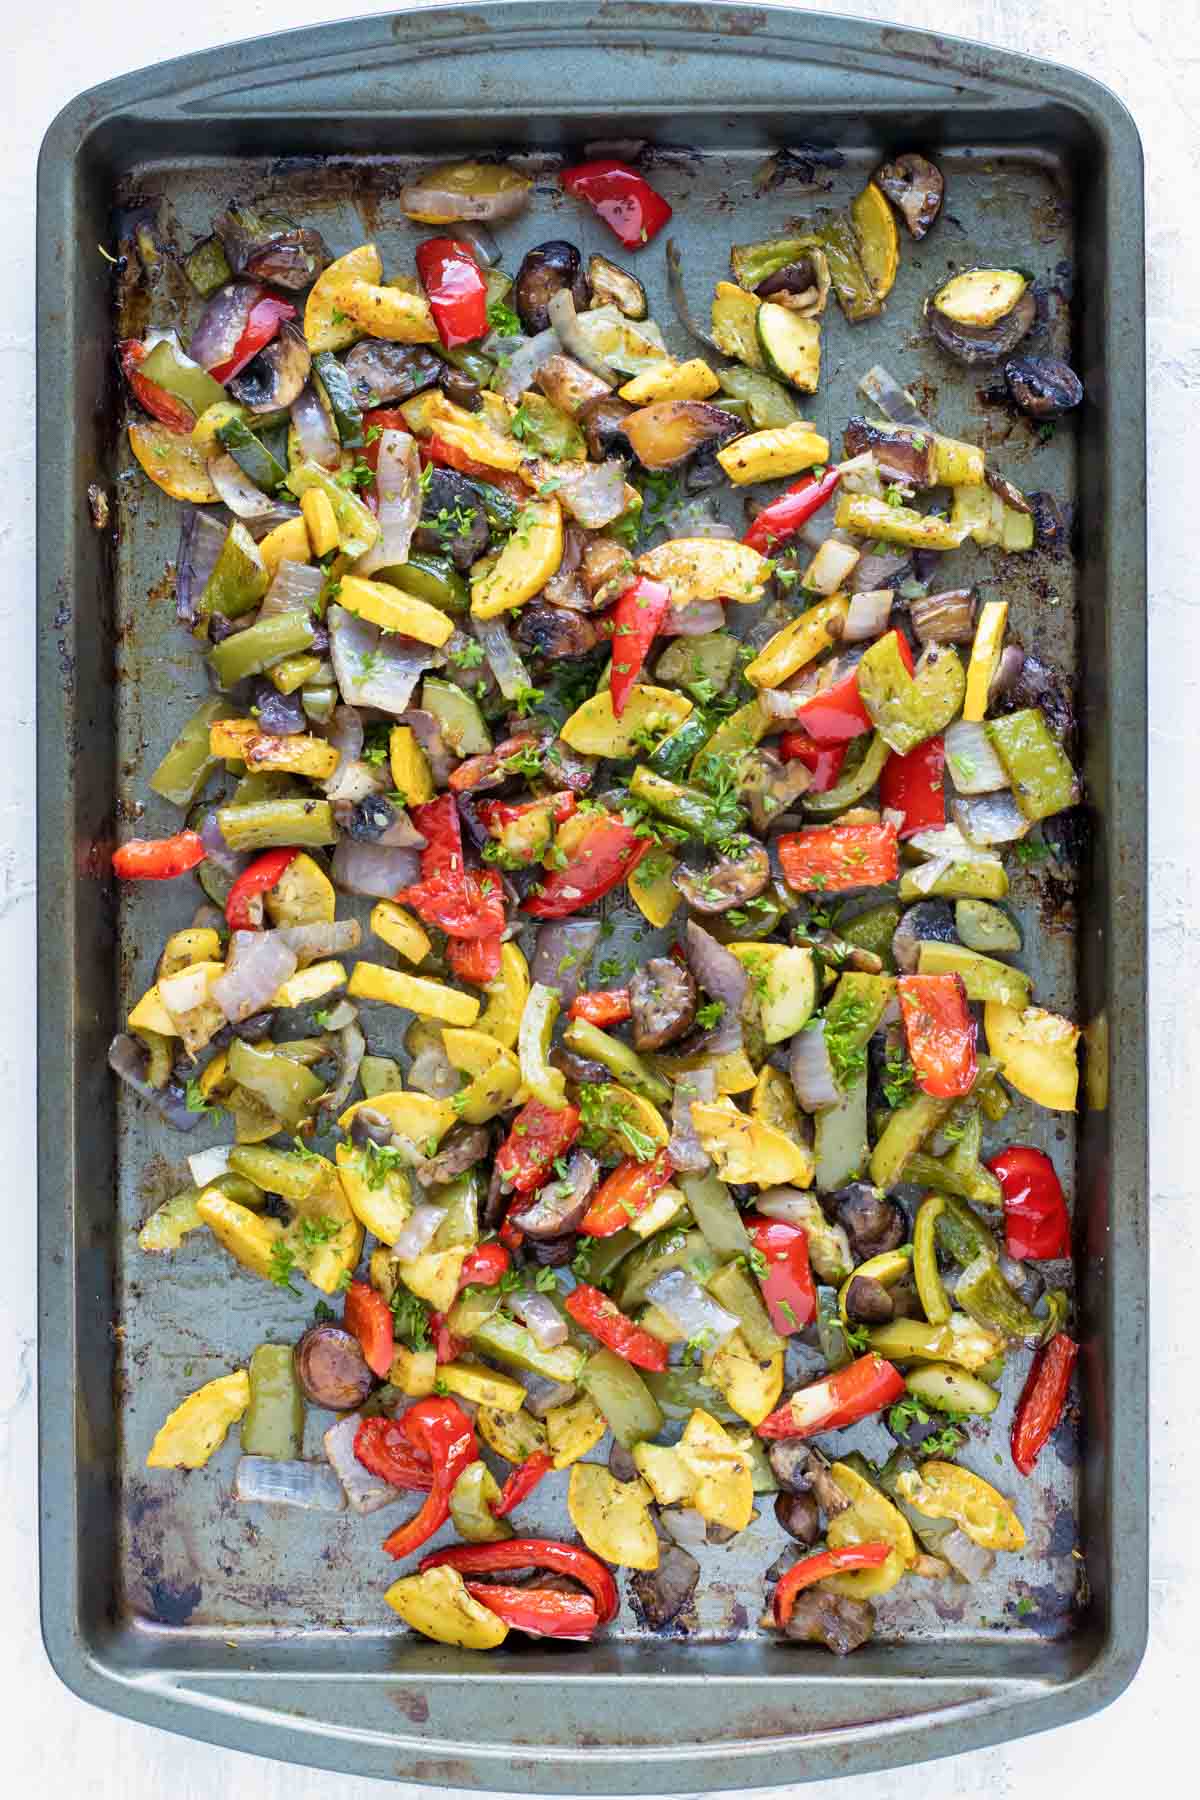 A tray of roasted veggies from the oven.